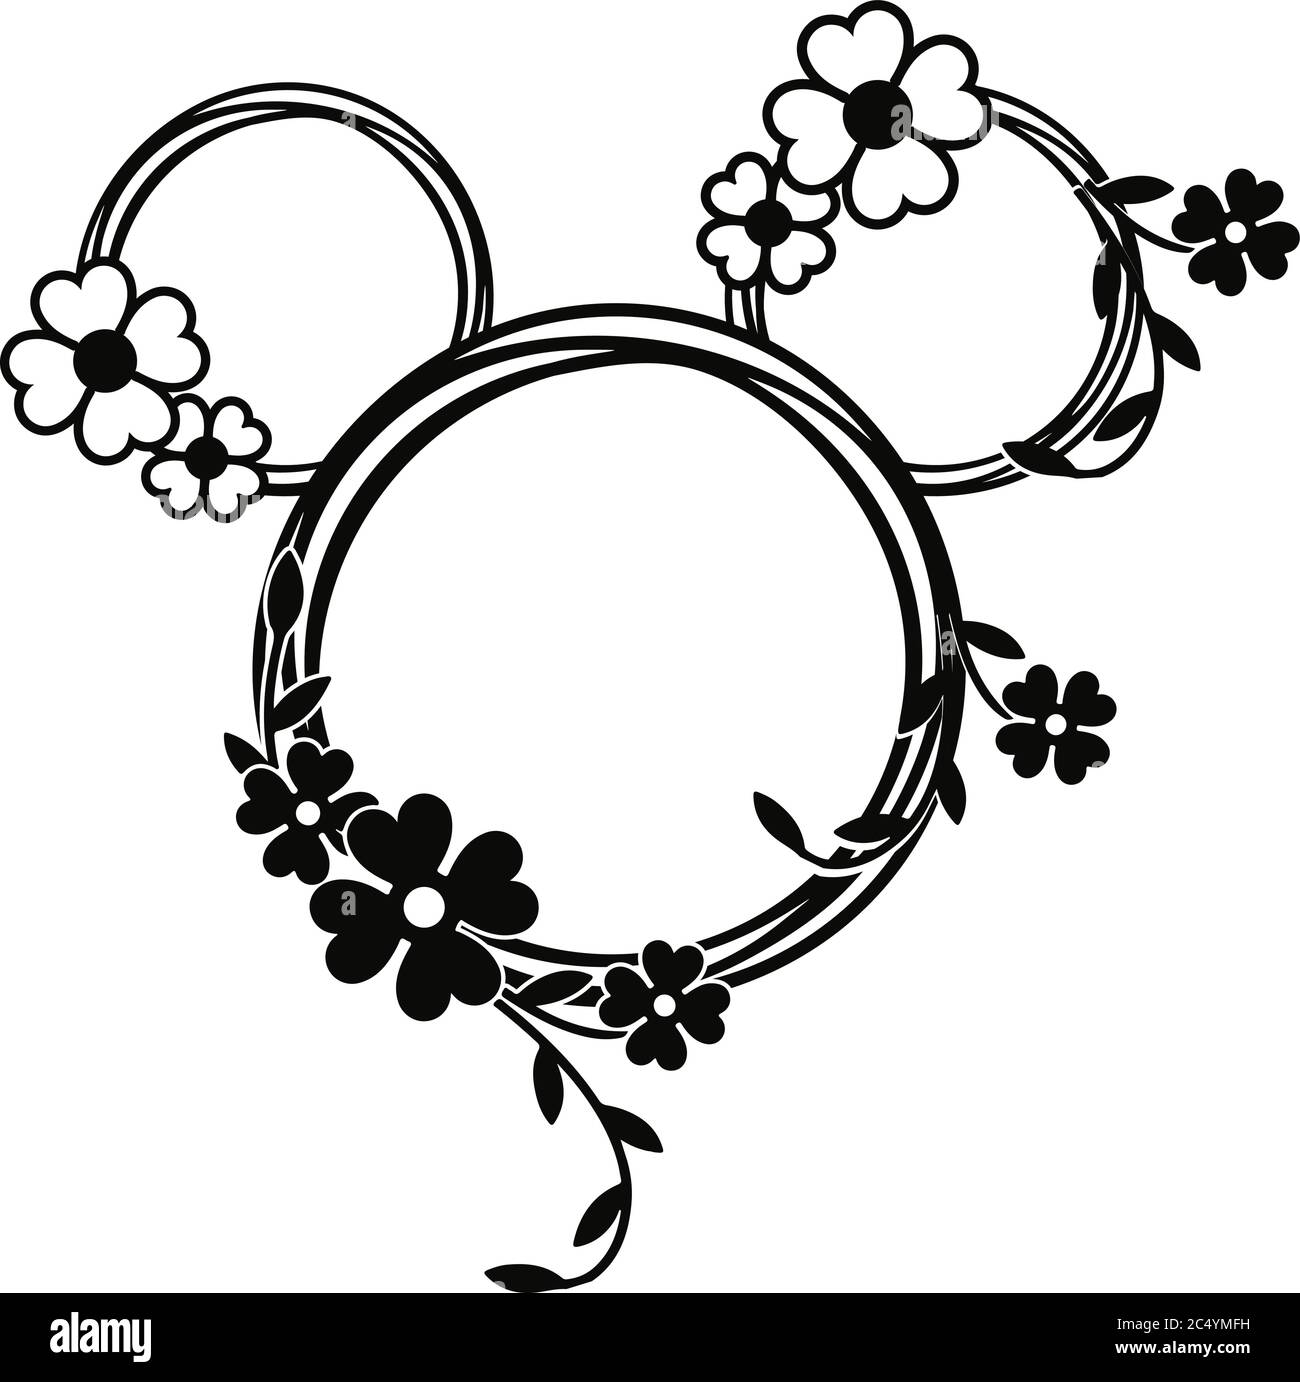 Mickey mouse cartoon Black and White Stock Photos & Images - Alamy